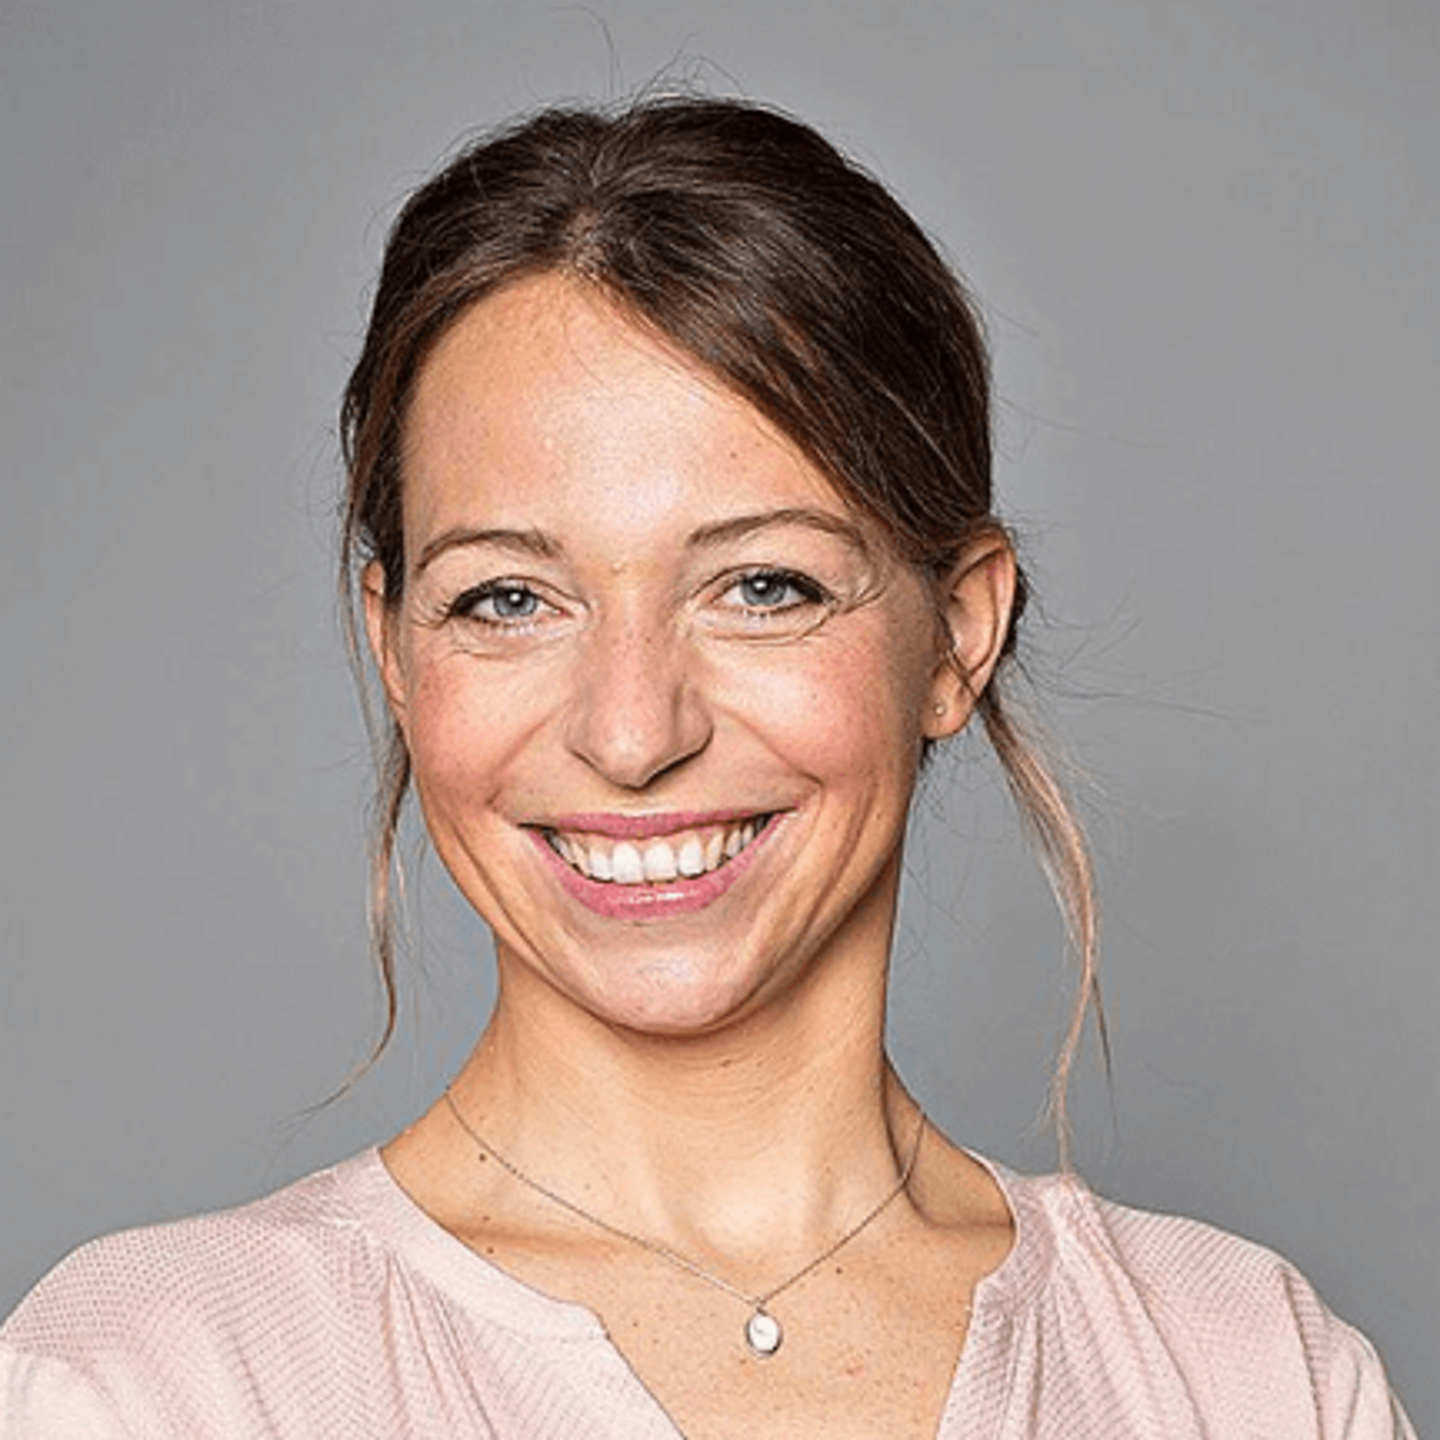 Pia Fischbach, Head of Strategy & Consulting at EOS Technology Solutions in Germany, is in charge of the development of Kollecto+ alongside Cristian Musat.